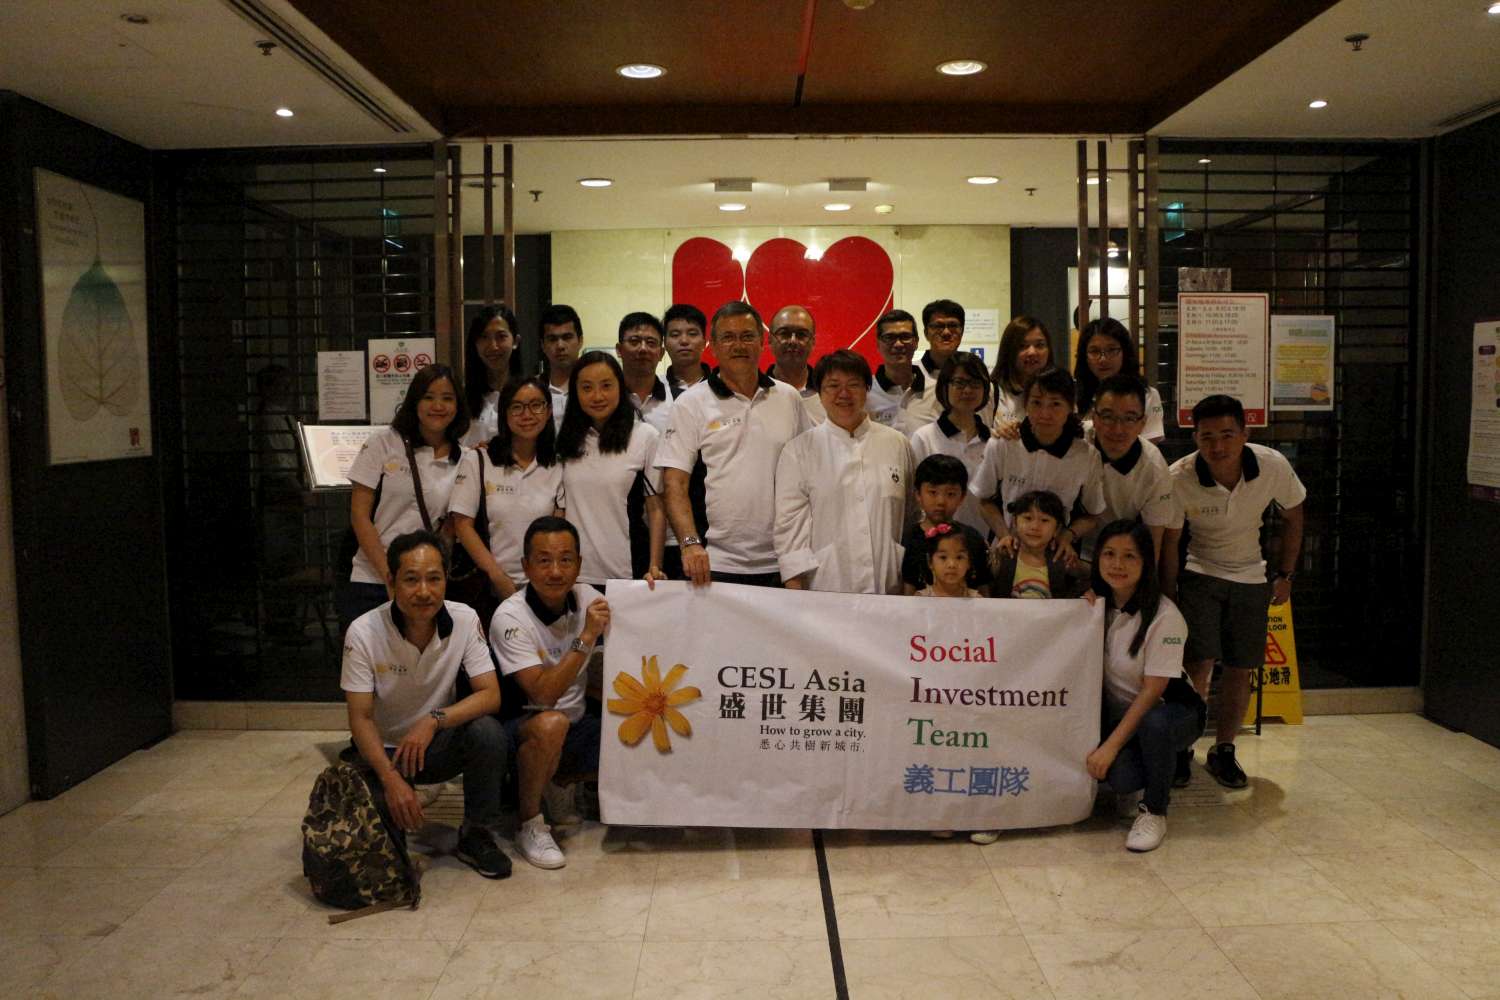 CESL Asia Advocated the Life-saving Voluntary Acts via its Blood Donation Activity